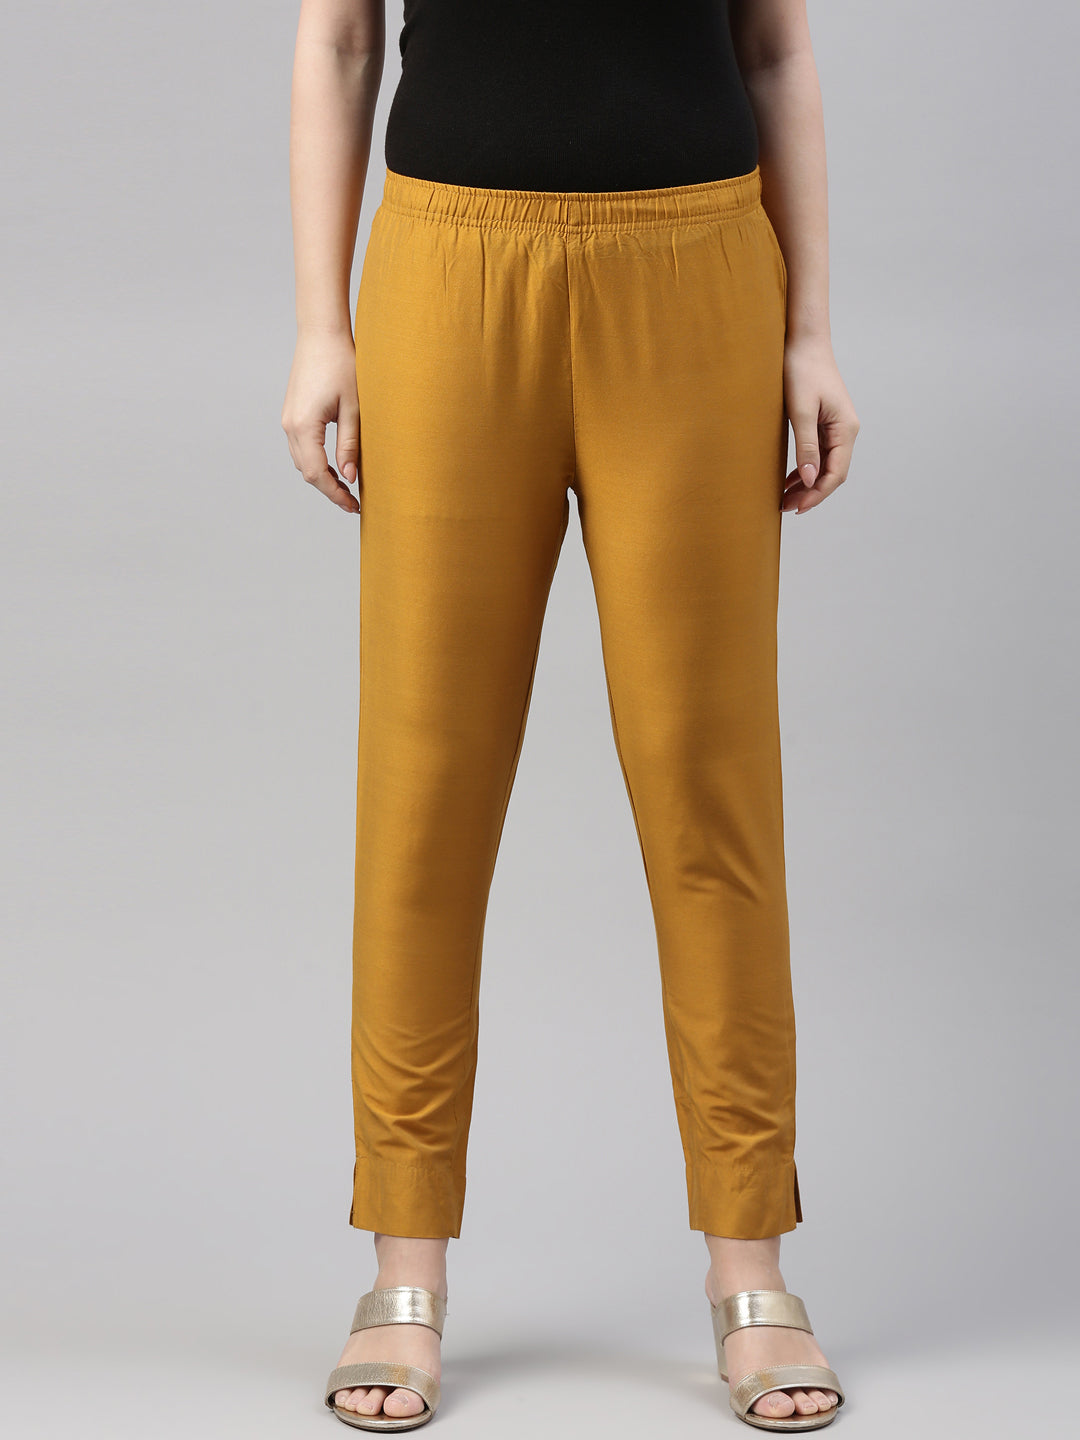 Mustard Pants Why You Tease Me  Alterations Needed